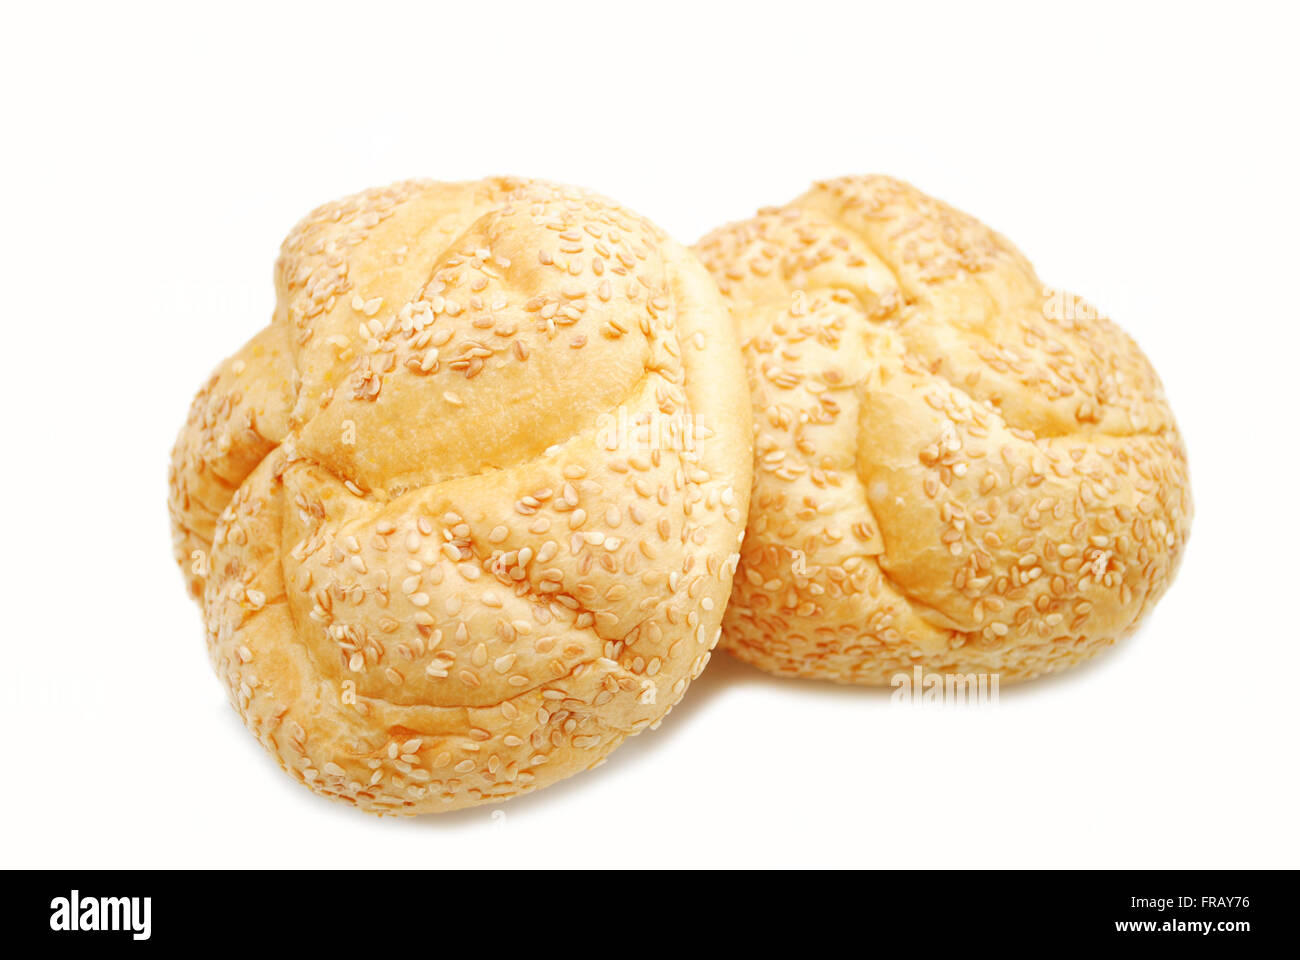 Two Sesame Rolls Isolate on a White Background Stock Photo